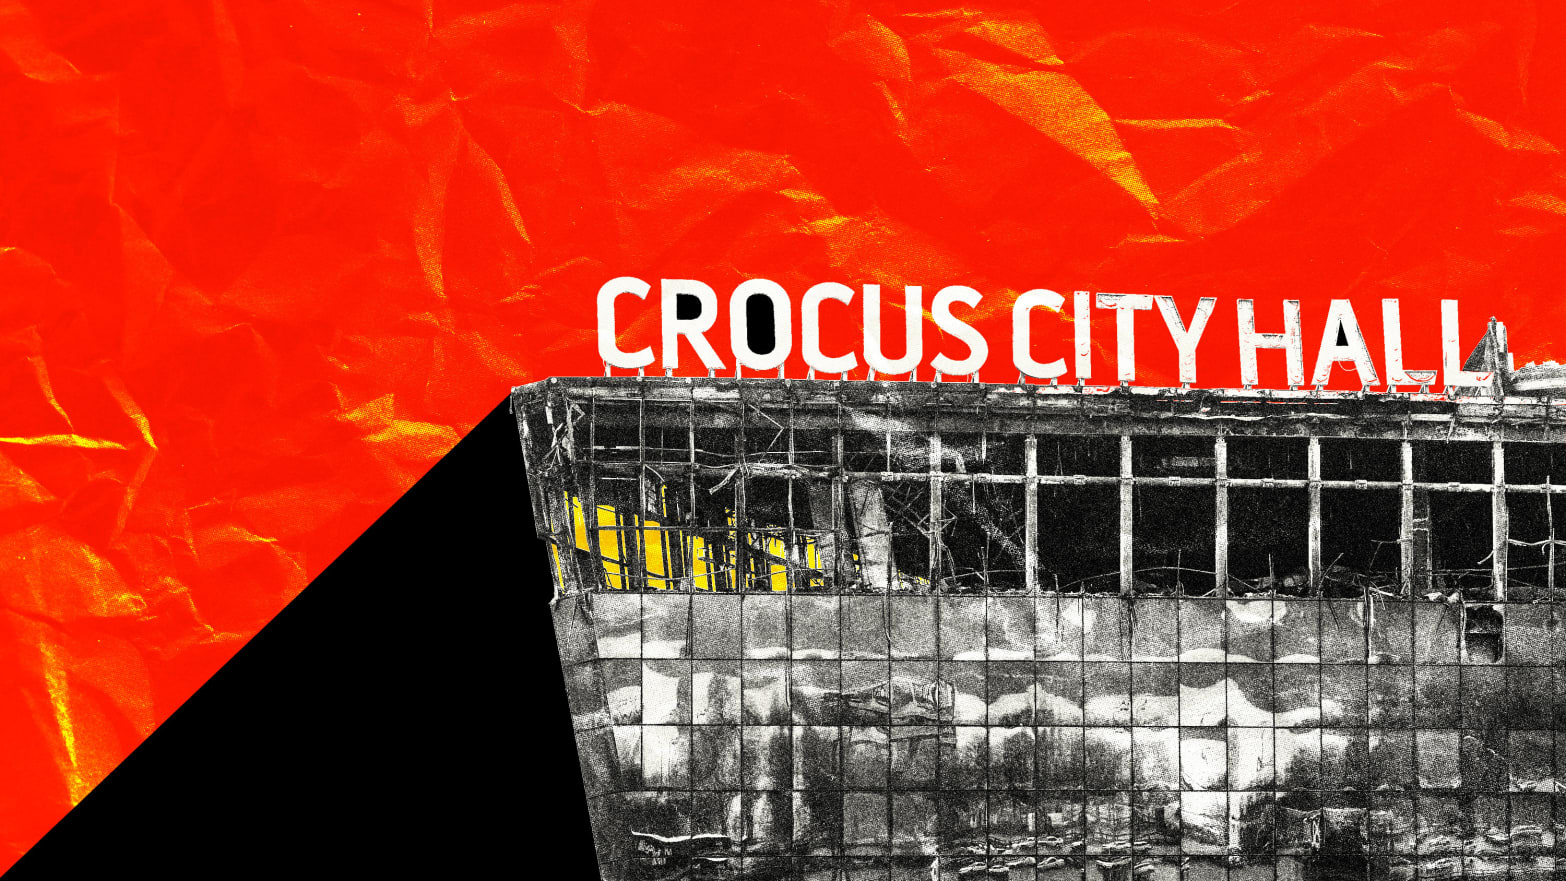 Photo illustration of Crocus City Hall in Moscow, Russia, site of a terrorist attack